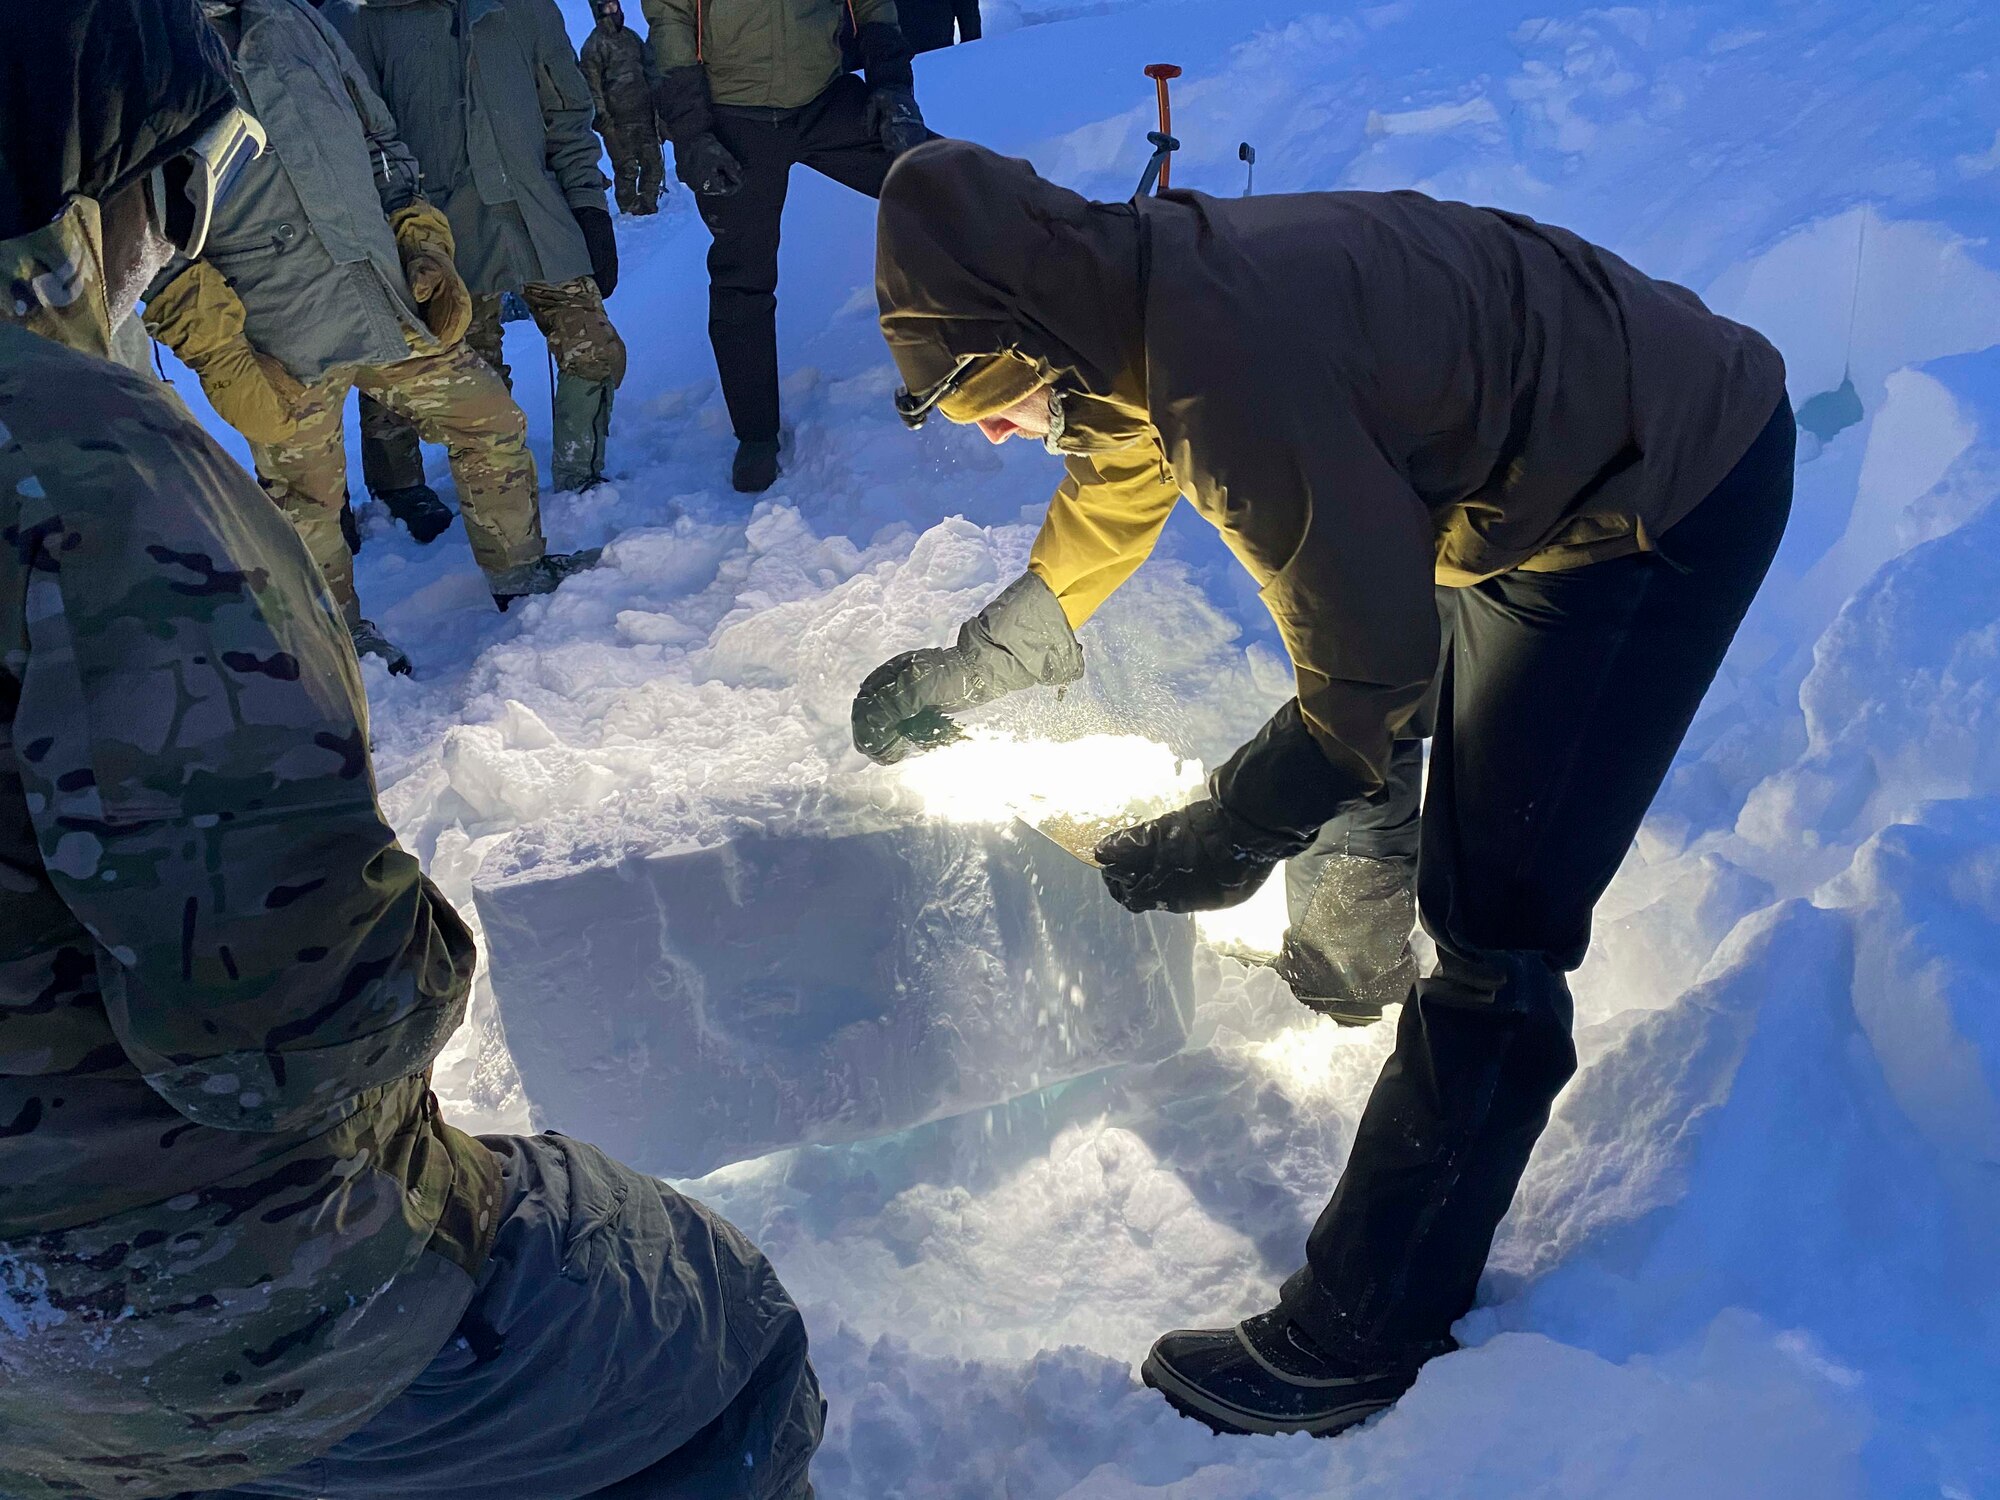 U.S. Air Force Senior Airman Jesse Cash, a 66th Training Squadron, Detachment 1 survival, evasion, resistance and escape (SERE) specialist demonstrates how to cut  out a block of hard-packed snow at Utqiaġvik (Barrow), Alaska, Jan. 11, 2021.